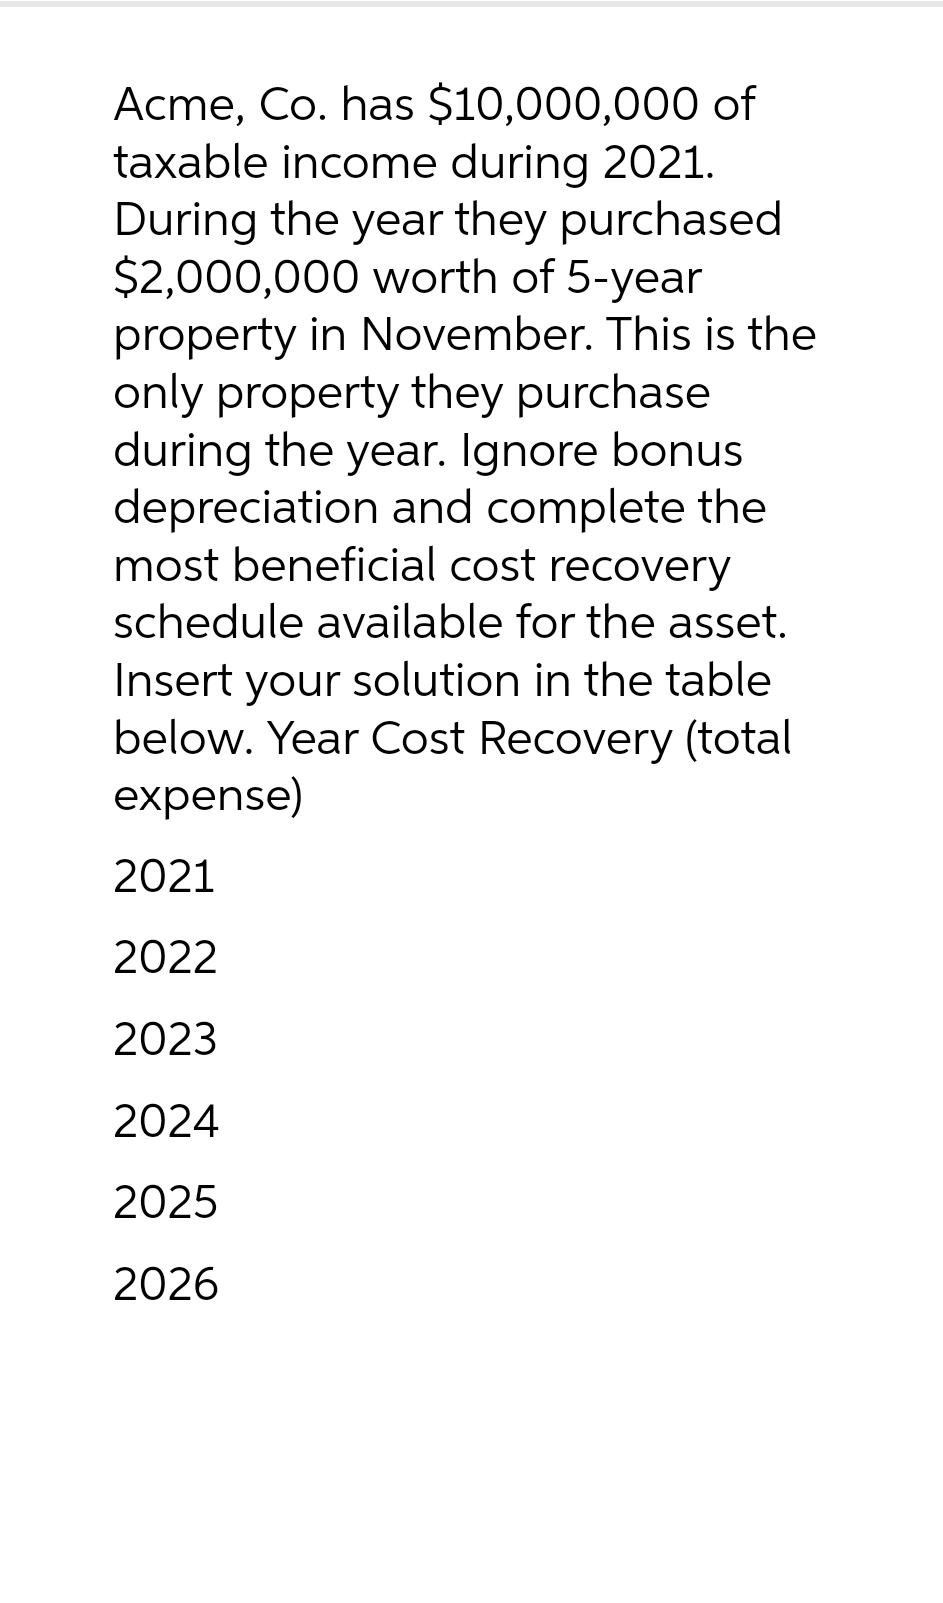 Acme, Co. has $10,000,000 of
taxable income during 2021.
During the year they purchased
$2,000,000 worth of 5-year
property in November. This is the
only property they purchase
during the year. Ignore bonus
depreciation and complete the
most beneficial cost recovery
schedule available for the asset.
Insert your solution in the table
below. Year Cost Recovery (total
expense)
2021
2022
2023
2024
2025
2026